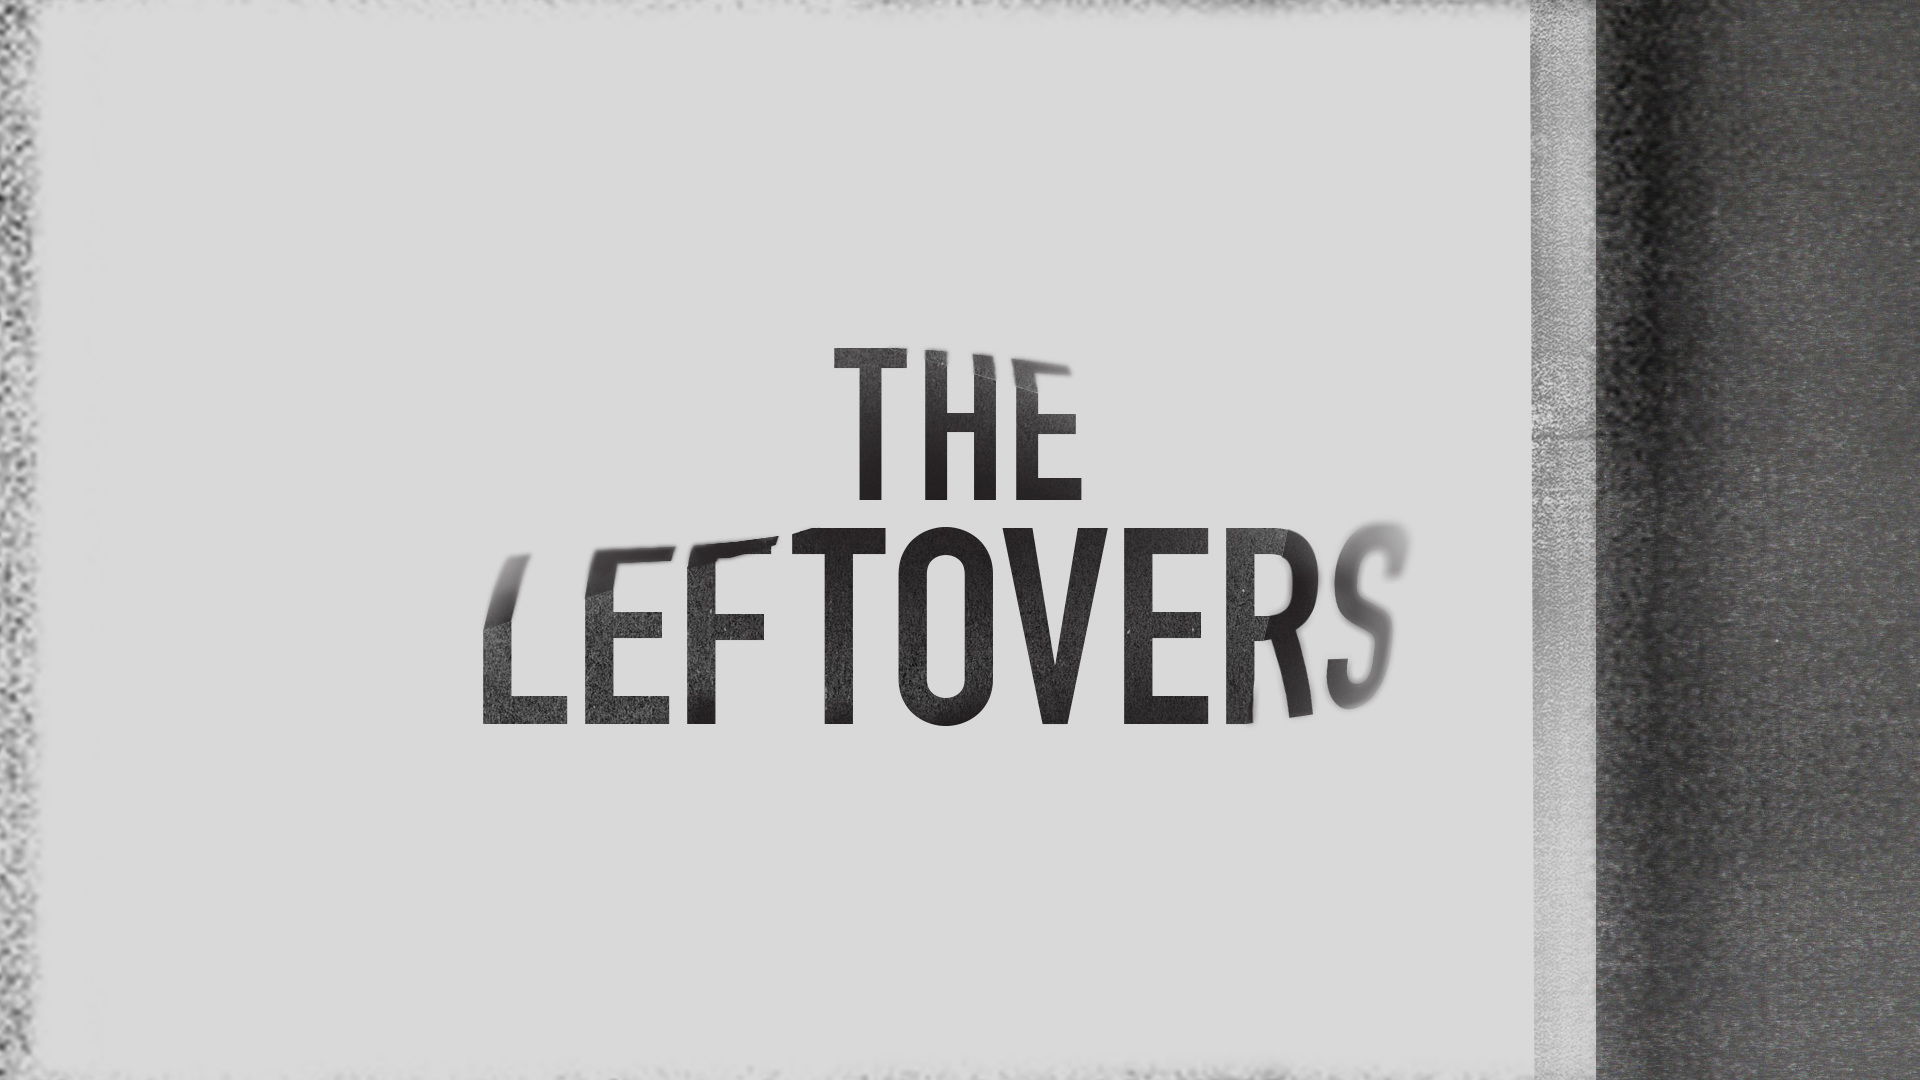 General 1920x1080 The Leftovers minimalism title typography